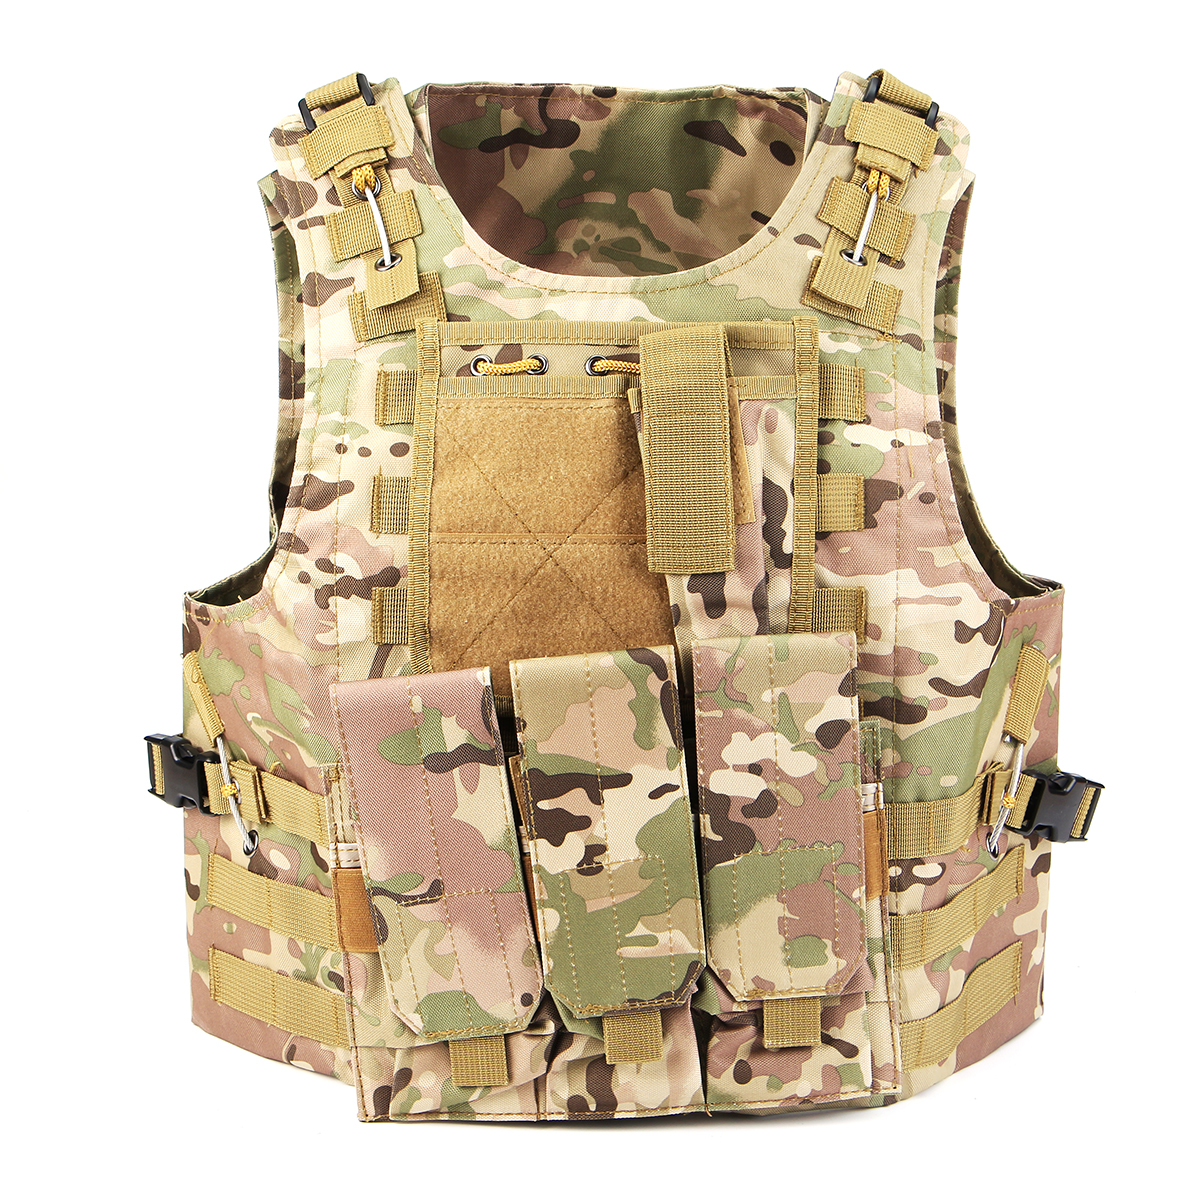 Military-Tactical-Vest-Molle-Combat-Assault-Plate-Carrier-Tactical-Vest-CS-Outdoor-Clothing-Hunting--1817235-1